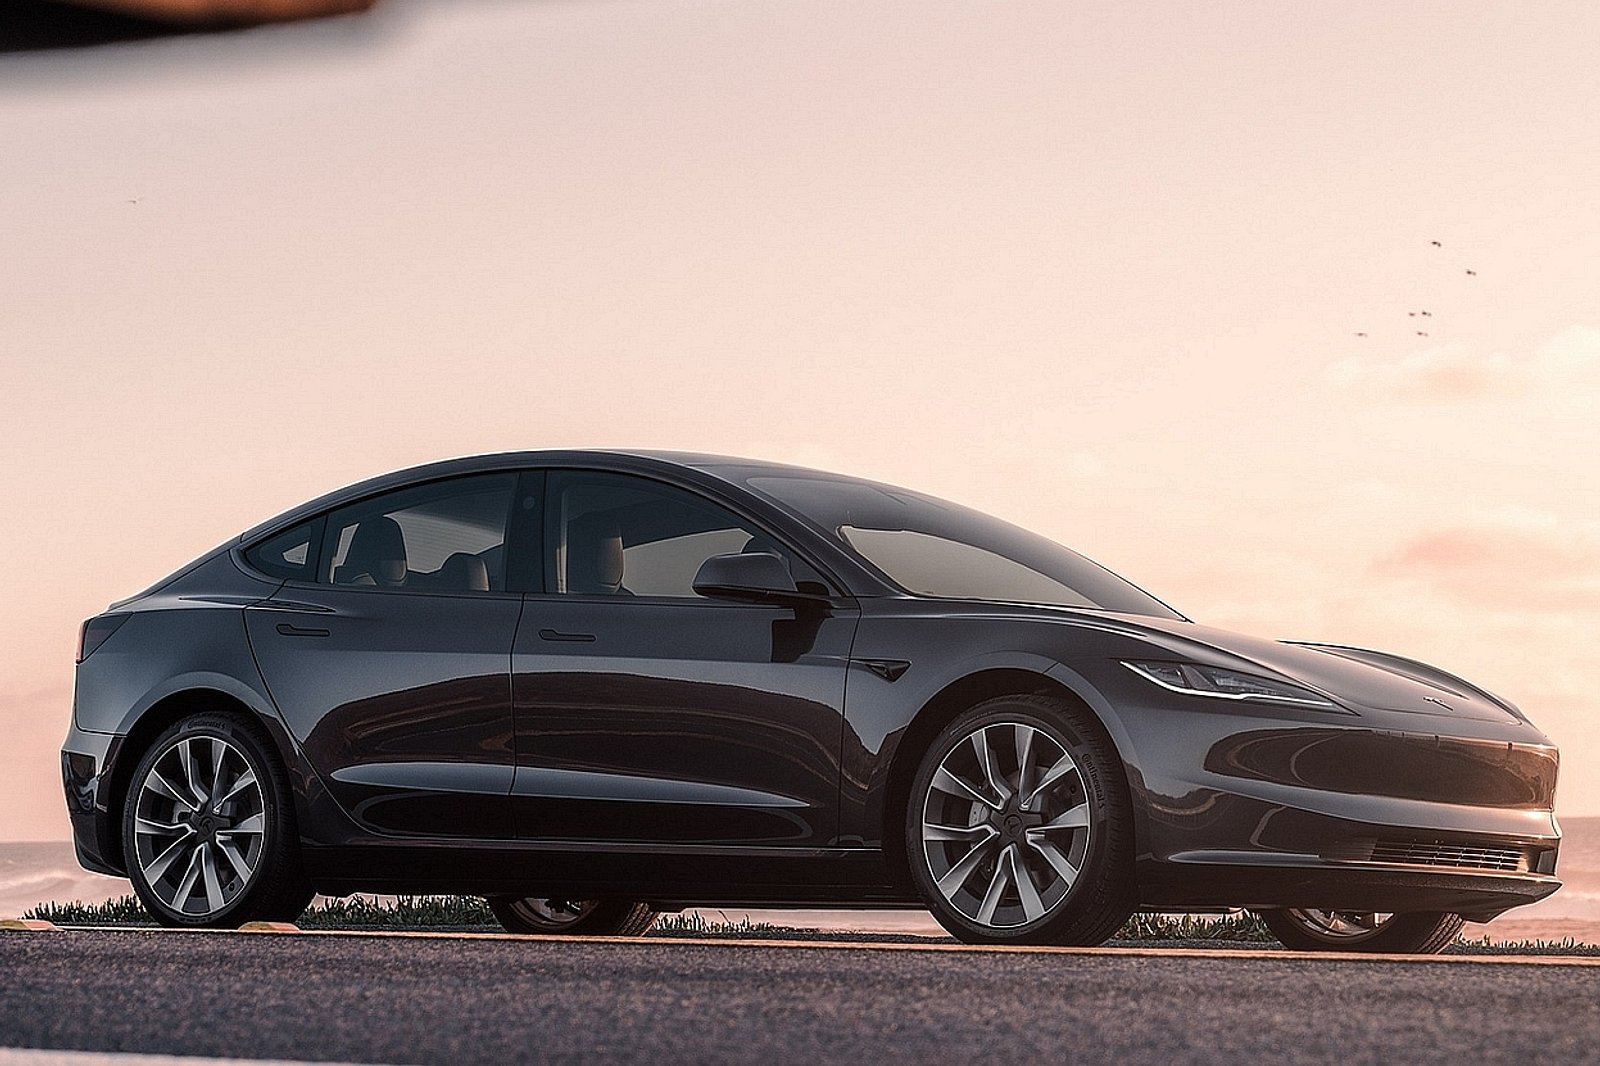 2024 Tesla Model 3: Here Are the Major Differences for Project Highland vs.  The Old Model